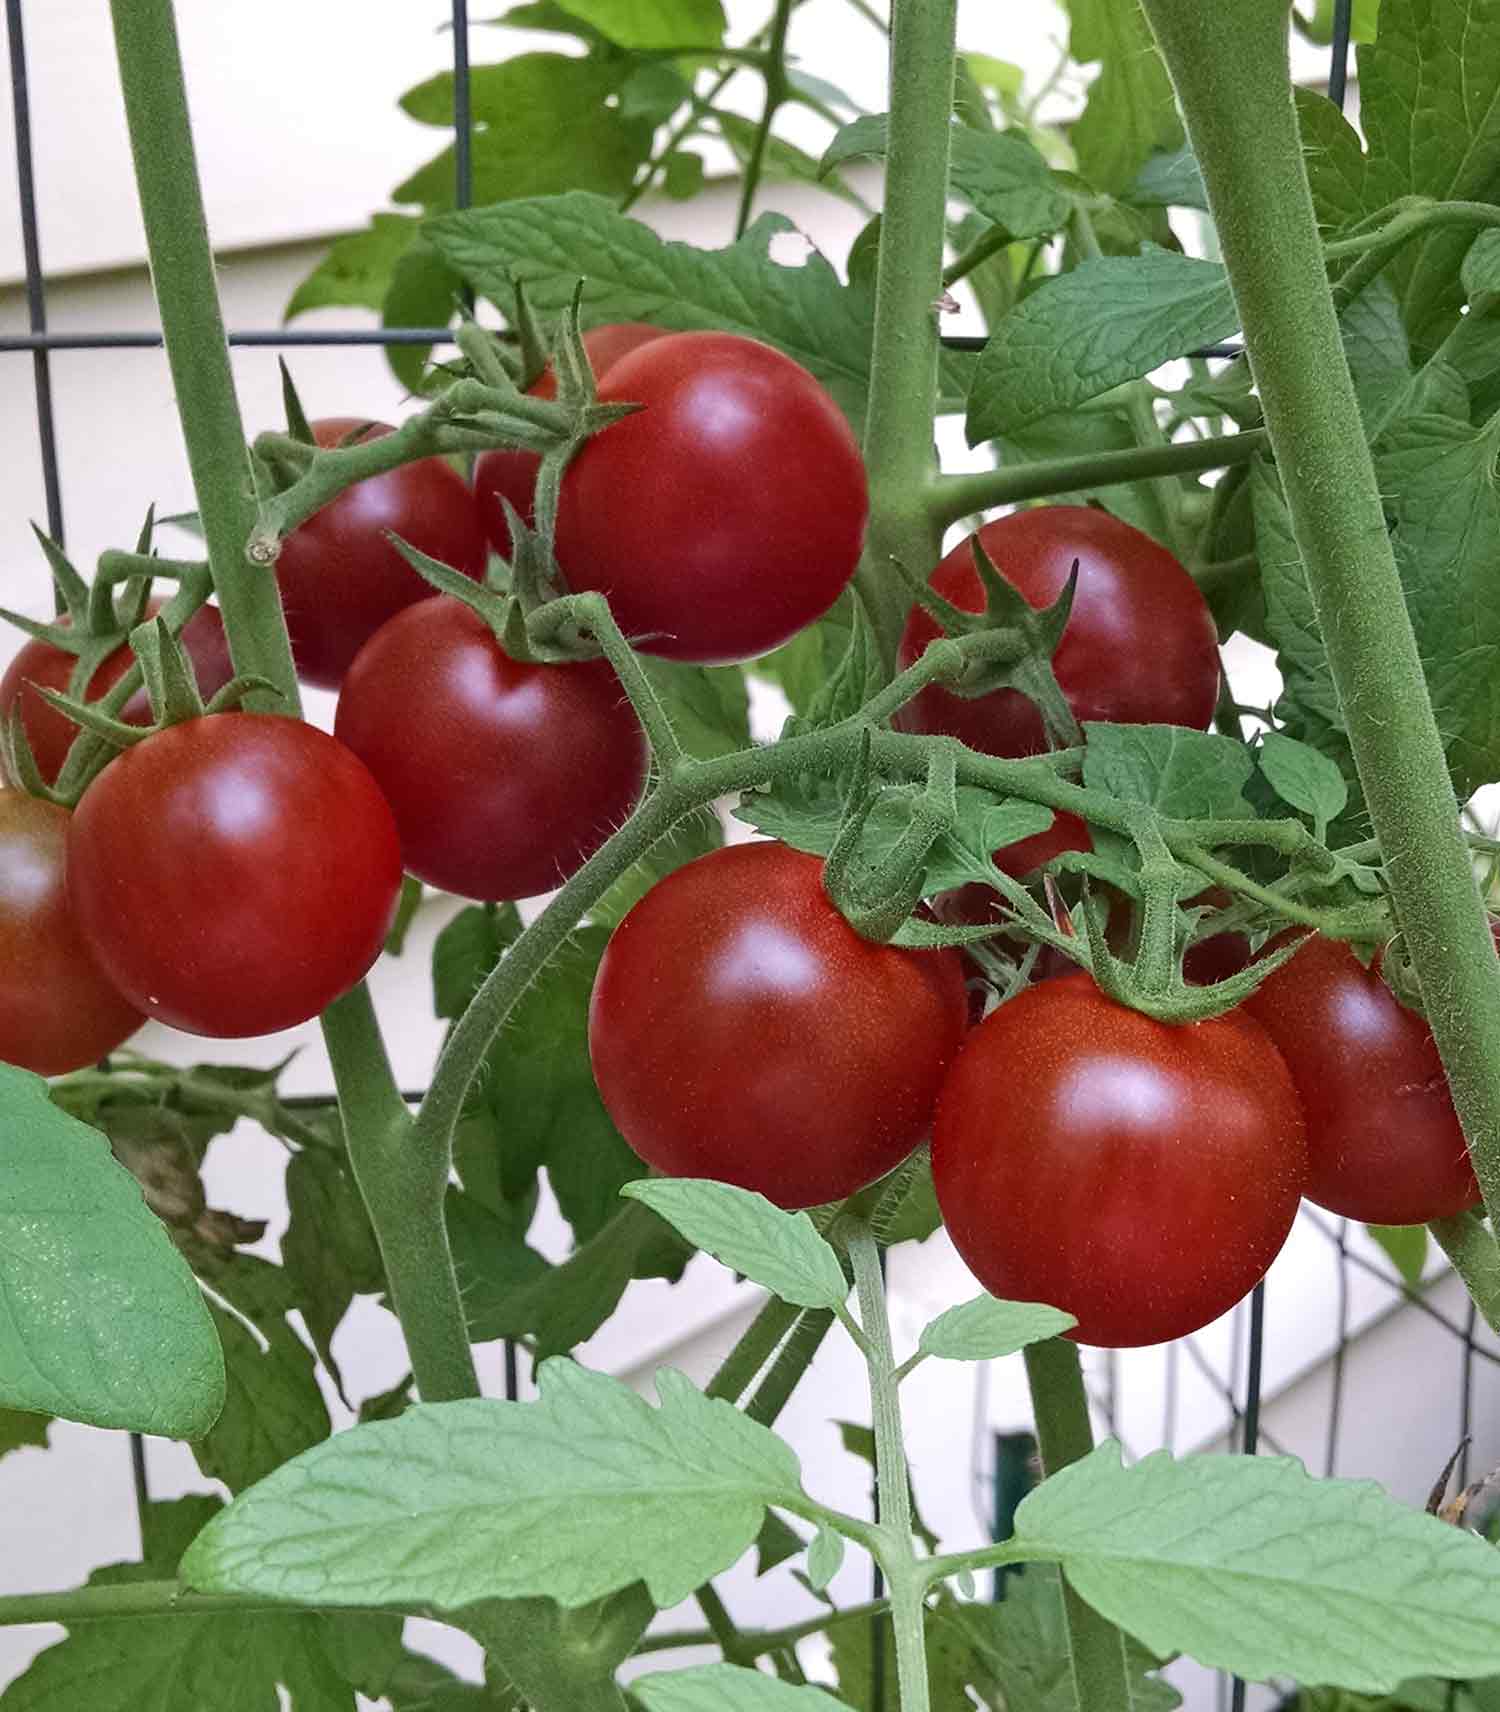 Super Sweet 100 Cherry Tomatoes, ripe and ready to pick from the vine.